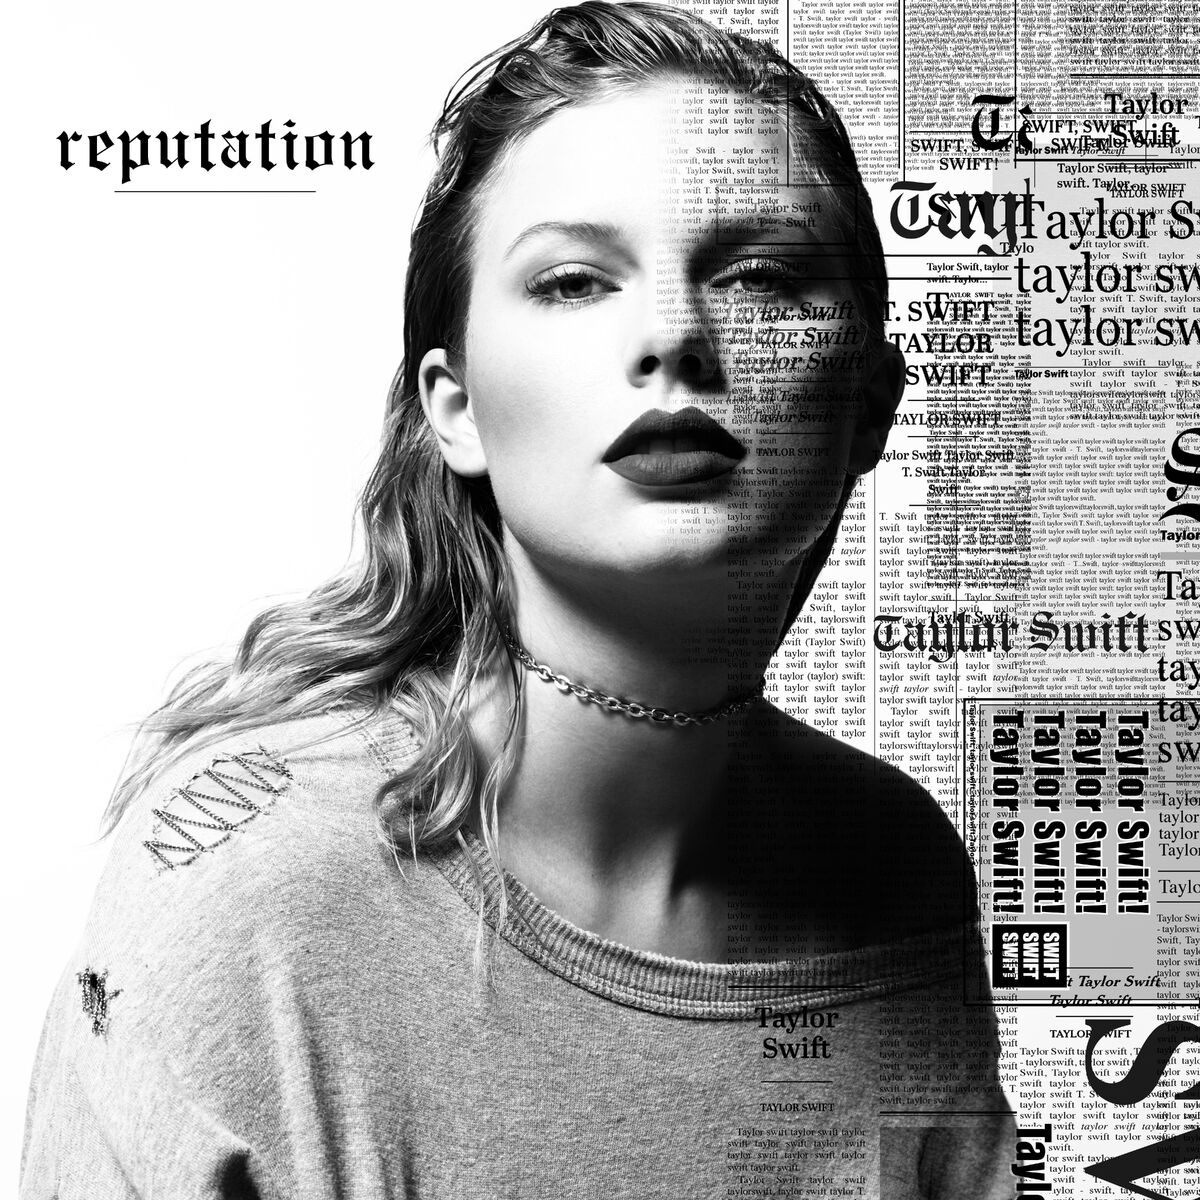 https://static.wikia.nocookie.net/taylor-swift/images/6/66/Taylor_Swift_-_reputation.jpg/revision/latest/scale-to-width-down/1200?cb=20220327091144